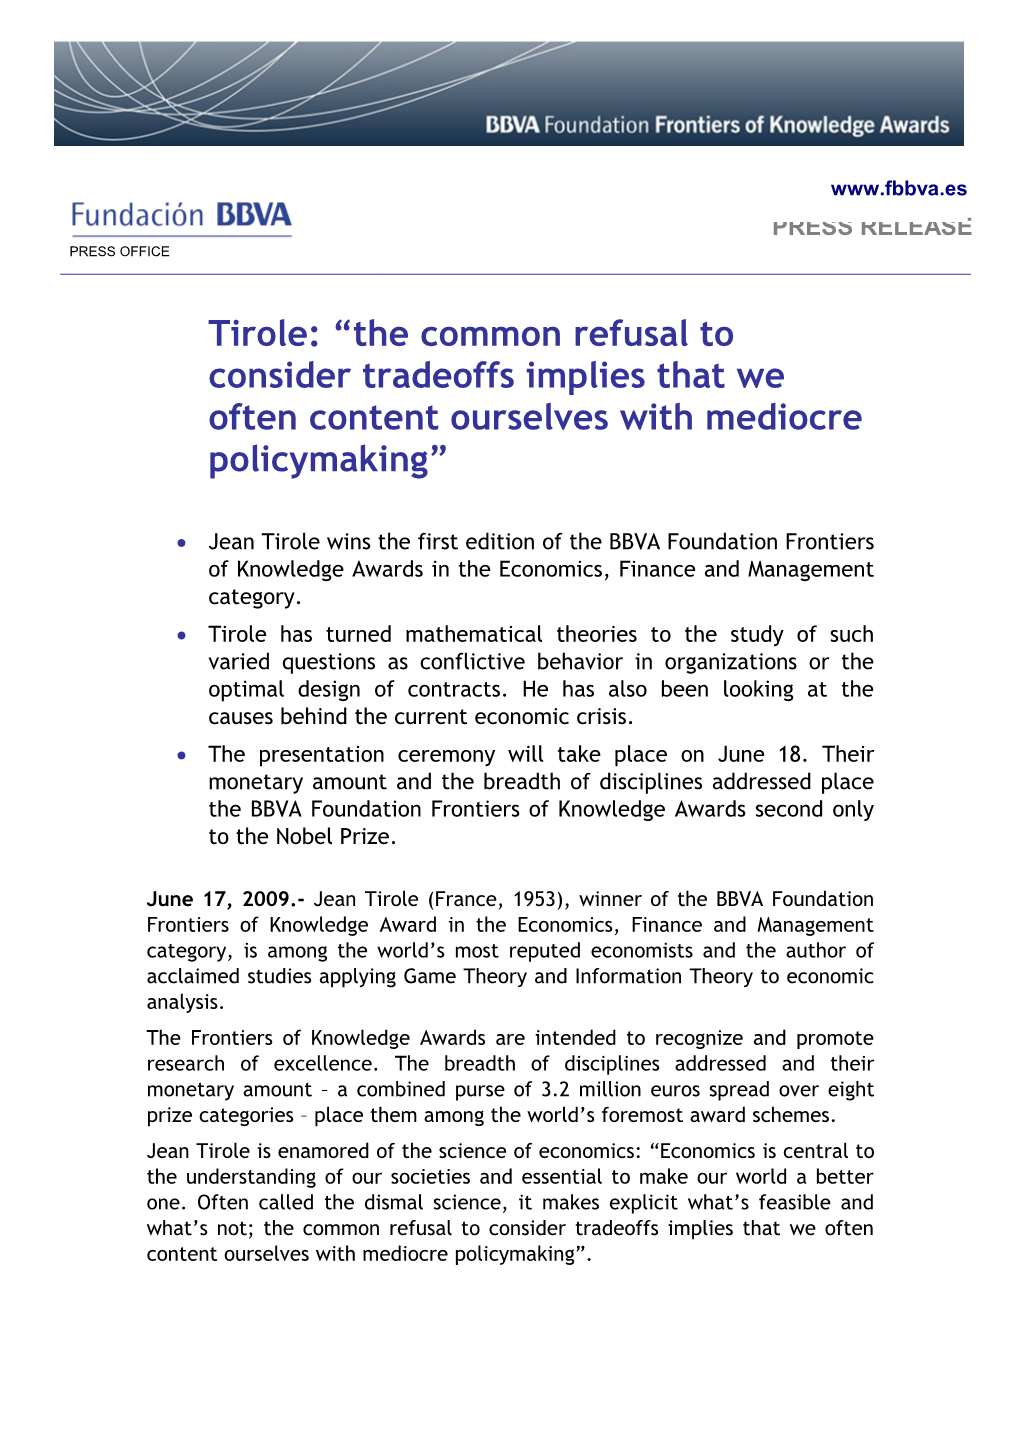 Tirole: the Common Refusal to Consider Tradeoffs Implies That We Often Content Ourselves